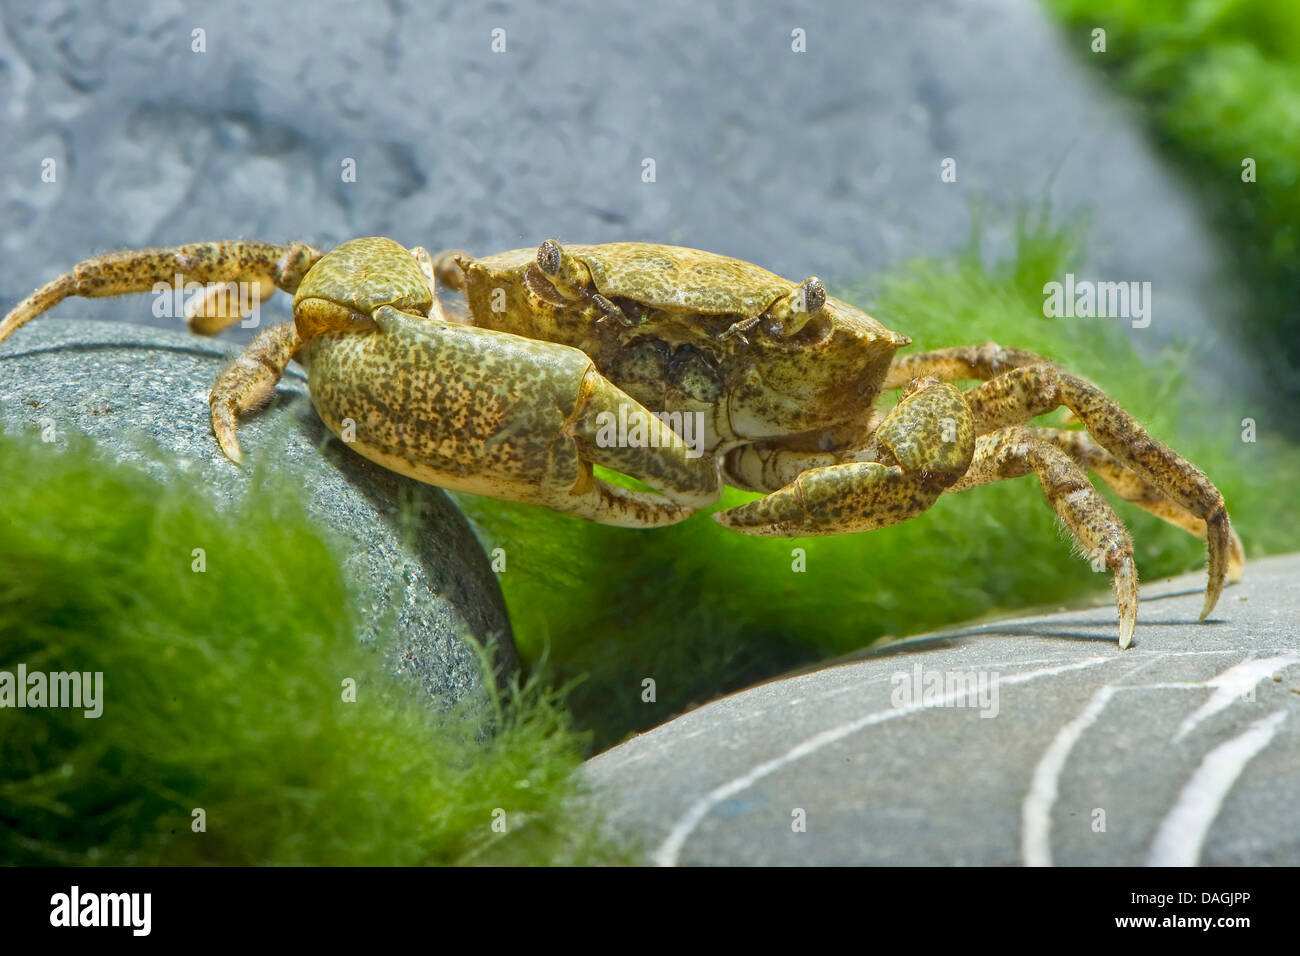 king crab, red king crab, Alaskan king crab, Alaskan king stone crab (Japanese crab, Kamchatka crab, Russian crab) (Paralithodes camtschaticus), in terrarium Stock Photo